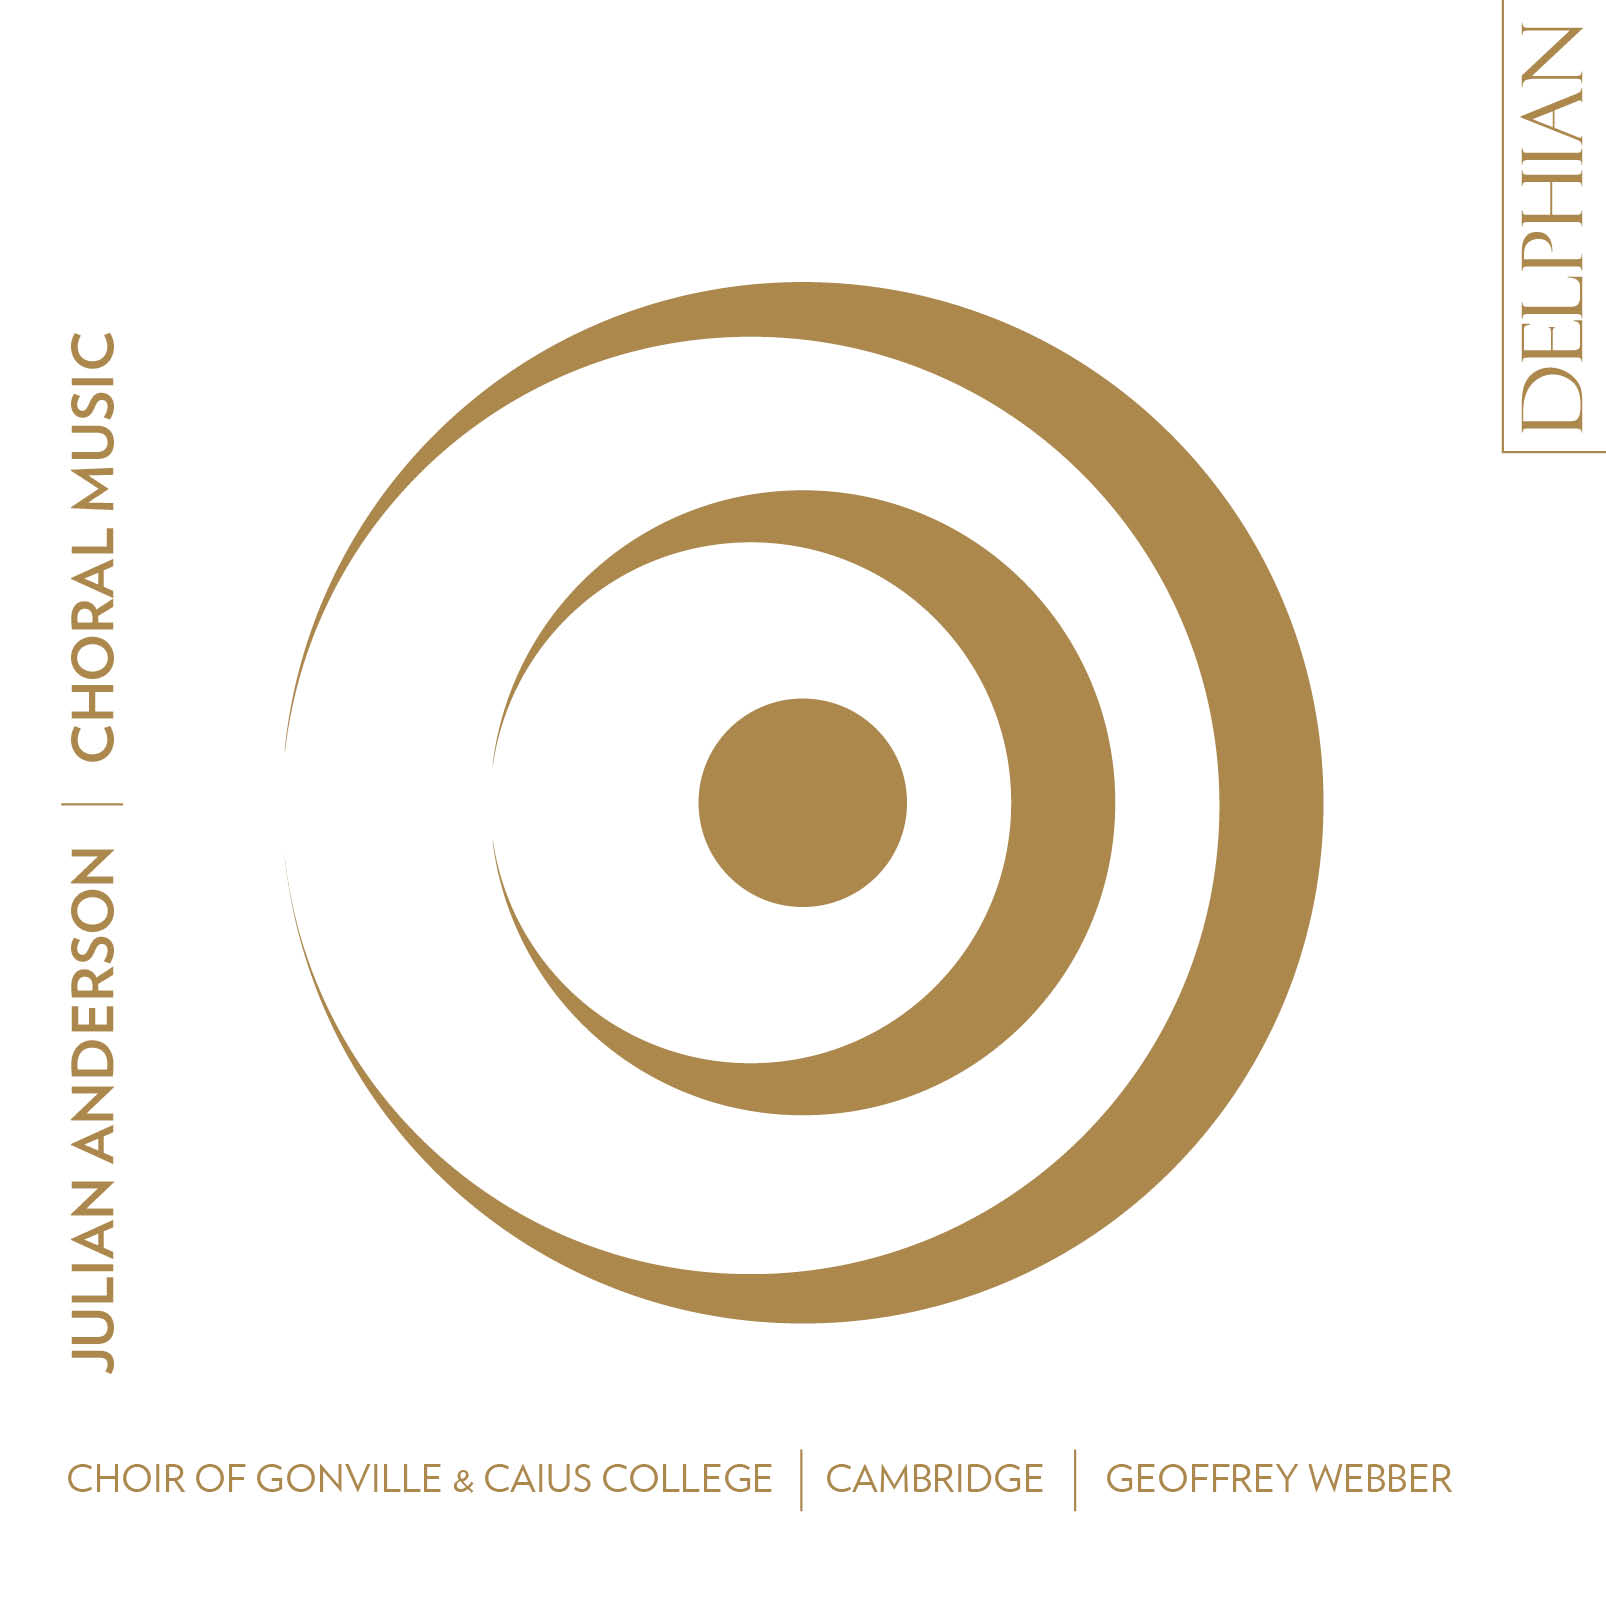 The Choir of Gonville & Caius College's CD 'Julian Anderson, Choral Music'